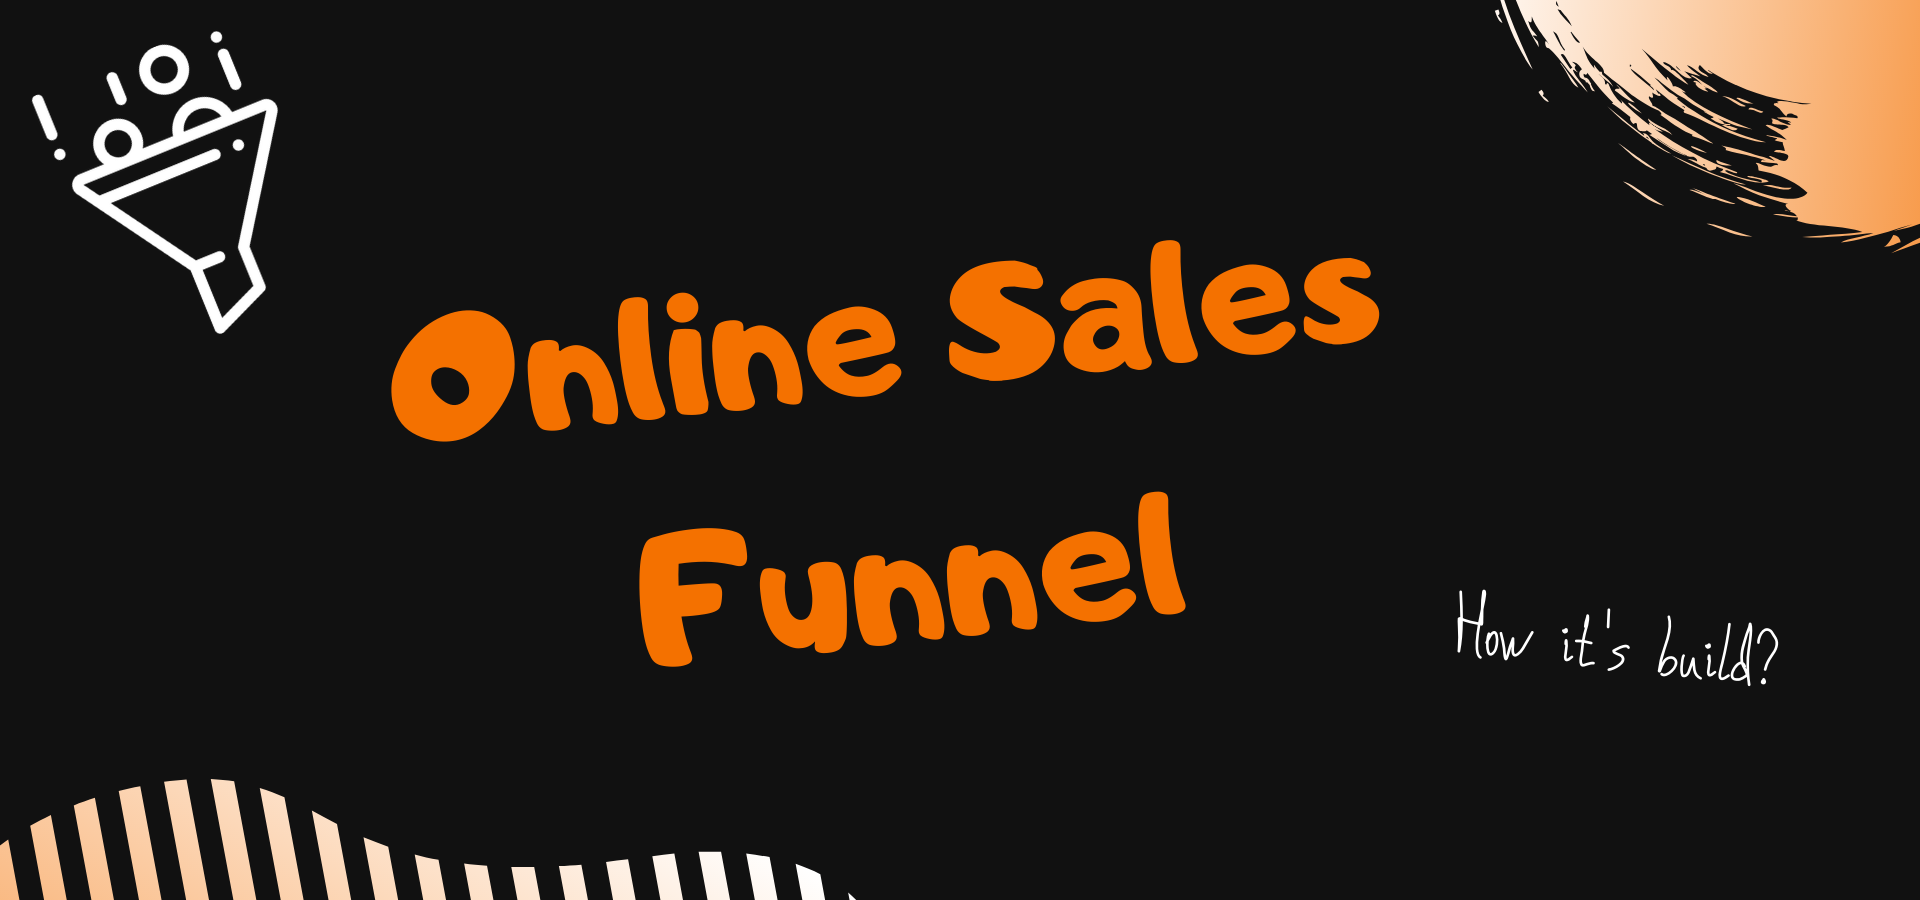 How to build a simple online sales funnel?